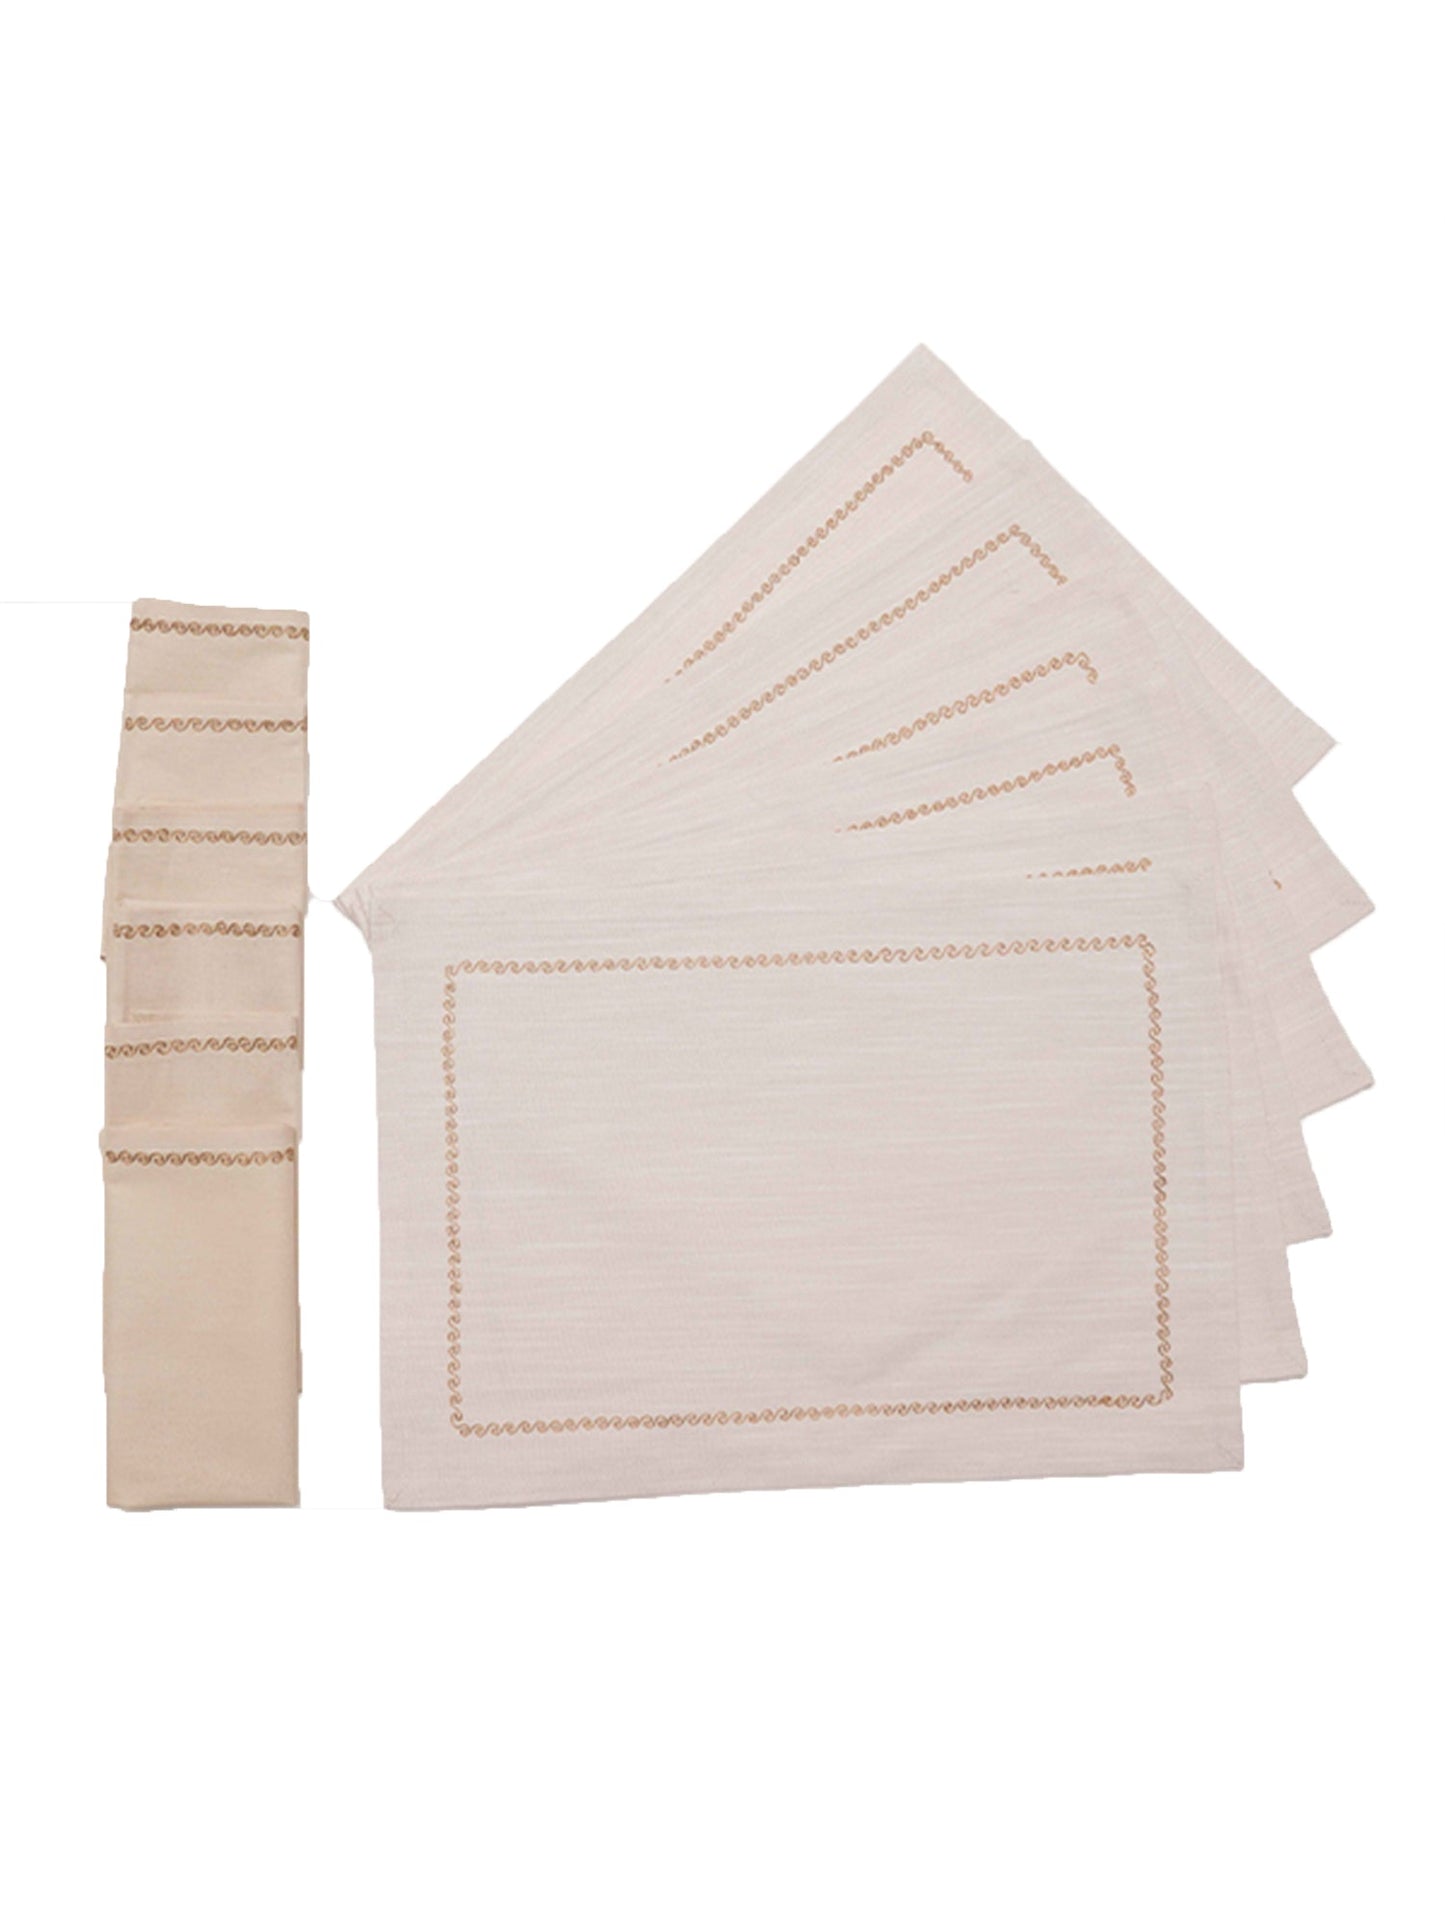 Table Mats and Napkins  Cotton Embroidered Off-White and Light Beige - 13" x 19" ; 16" x 16" - Set of 6